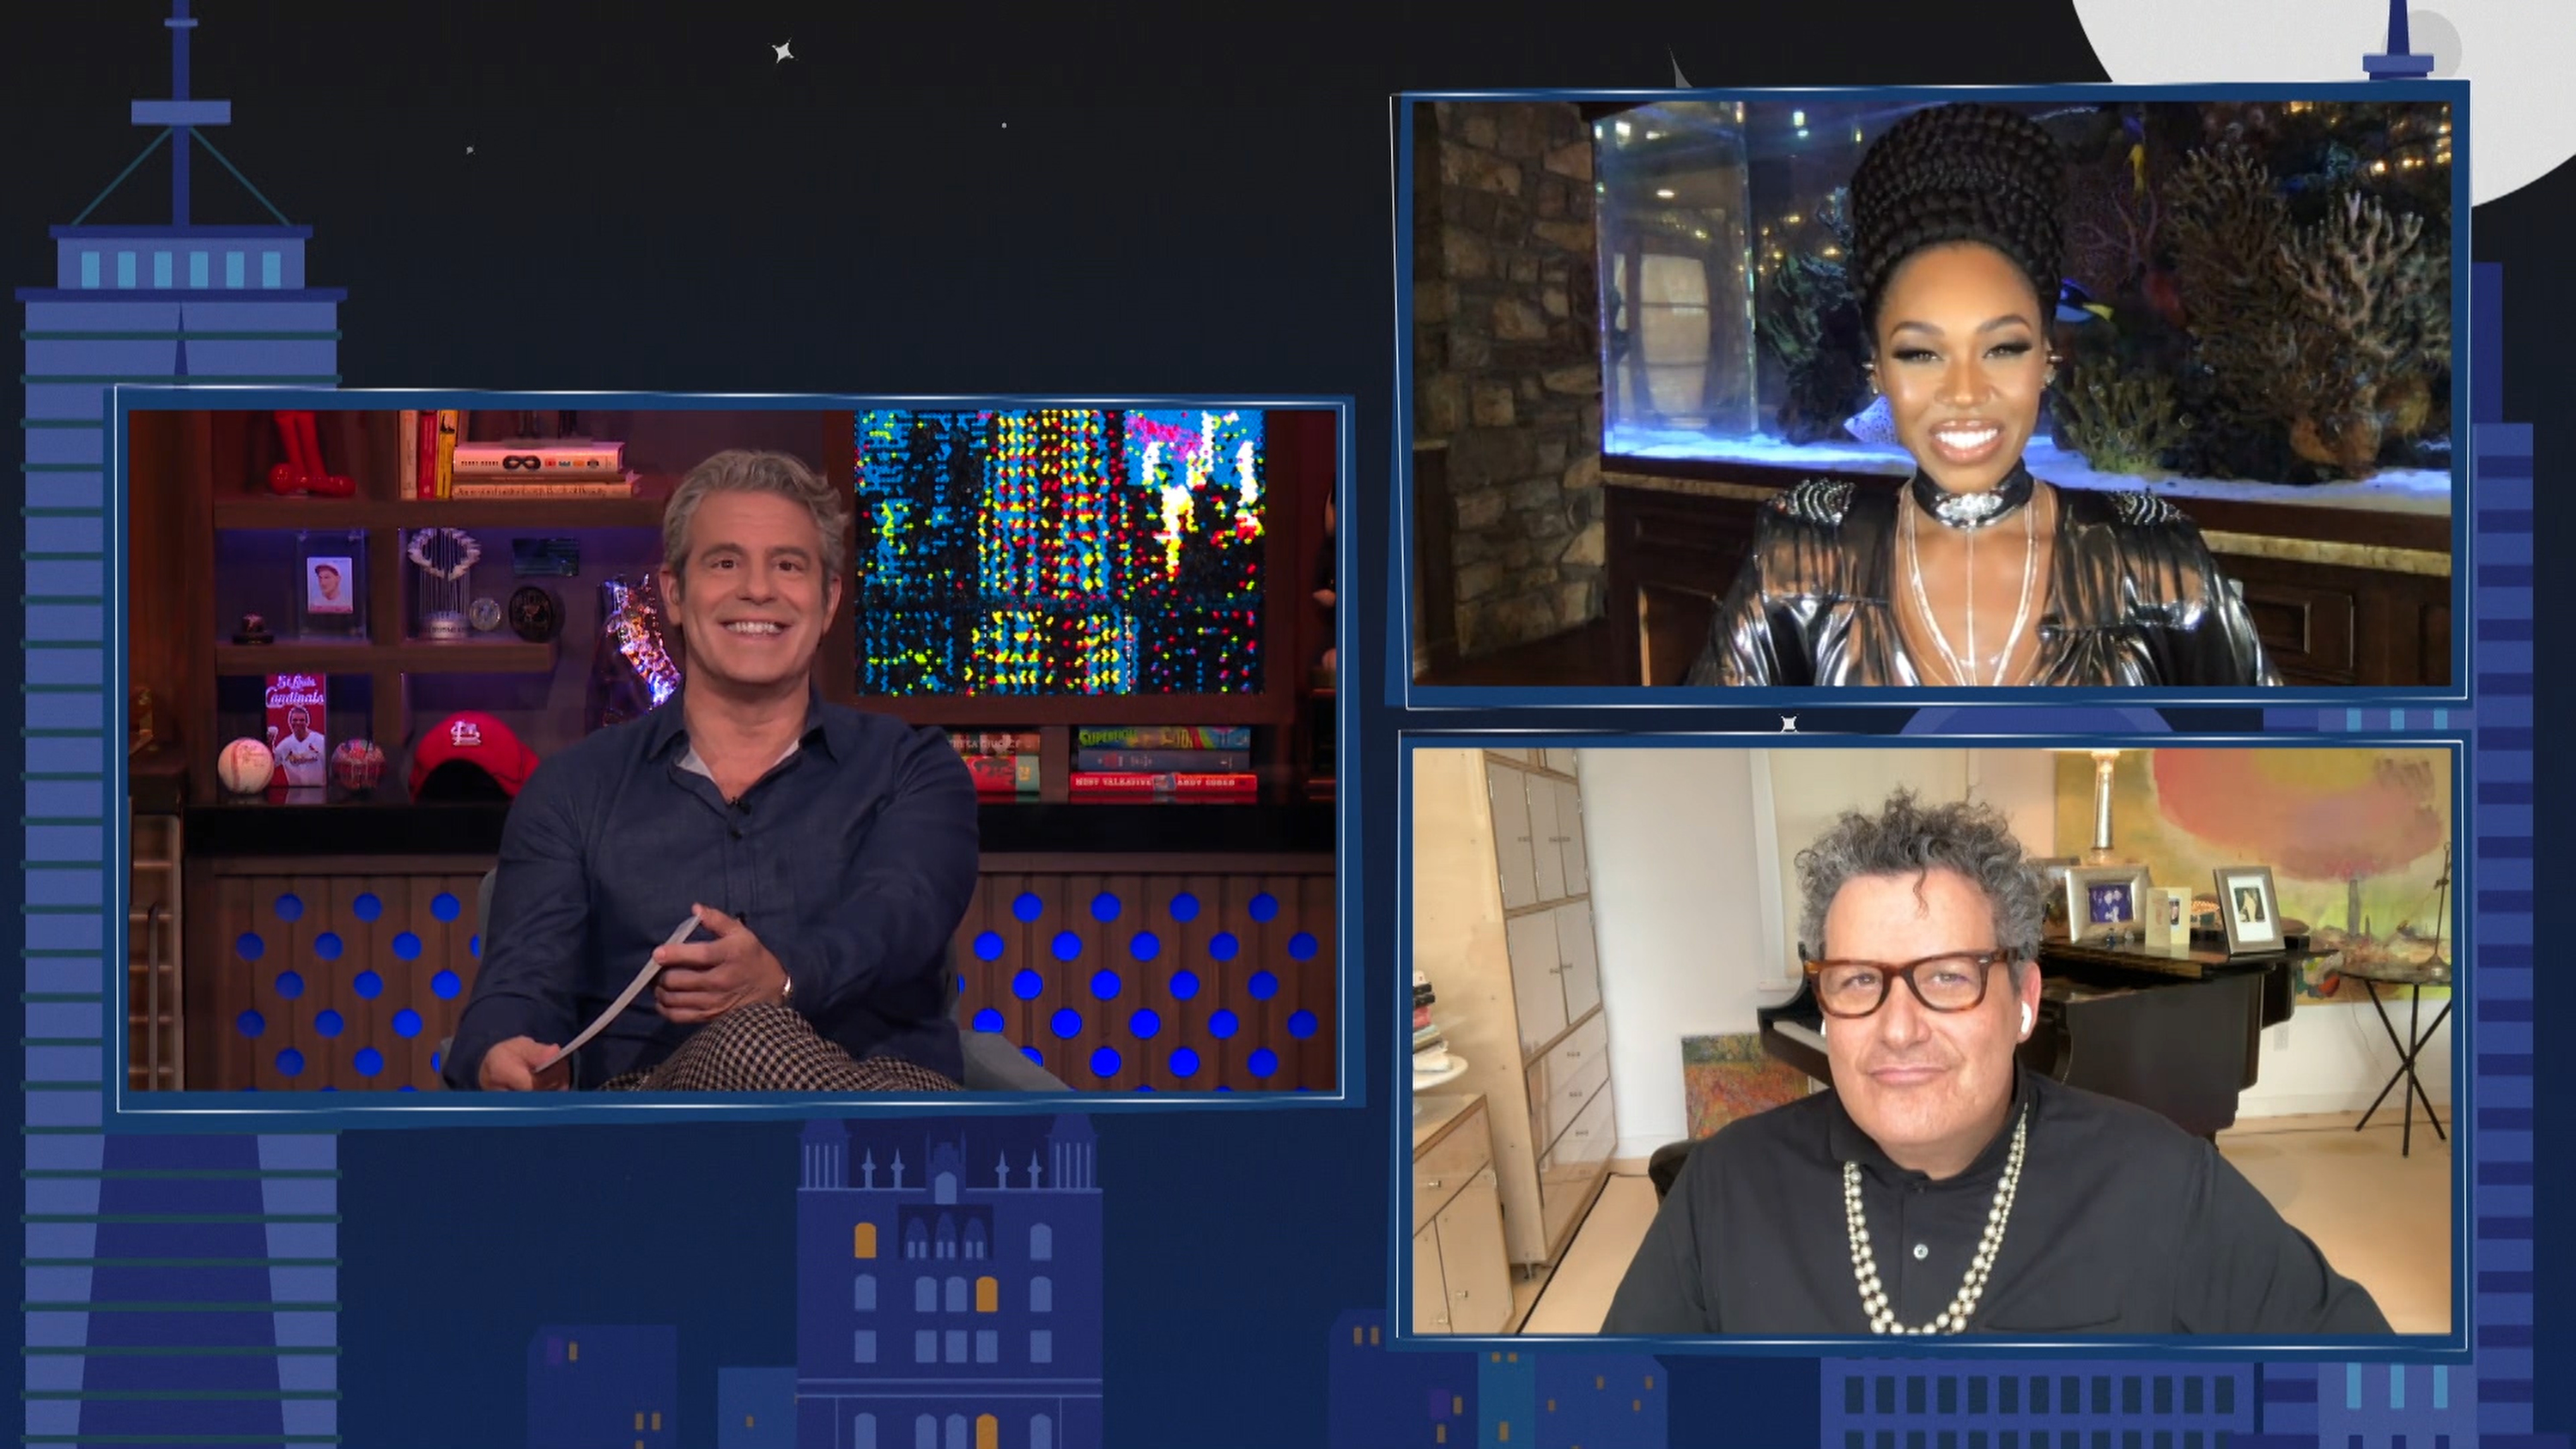 'Watch What Happens Live with Andy Cohen' -- Episode 17192 -- Pictured in this screen grab: (l-r) Andy Cohen, Isaac Mizrahi, Monique Samuels